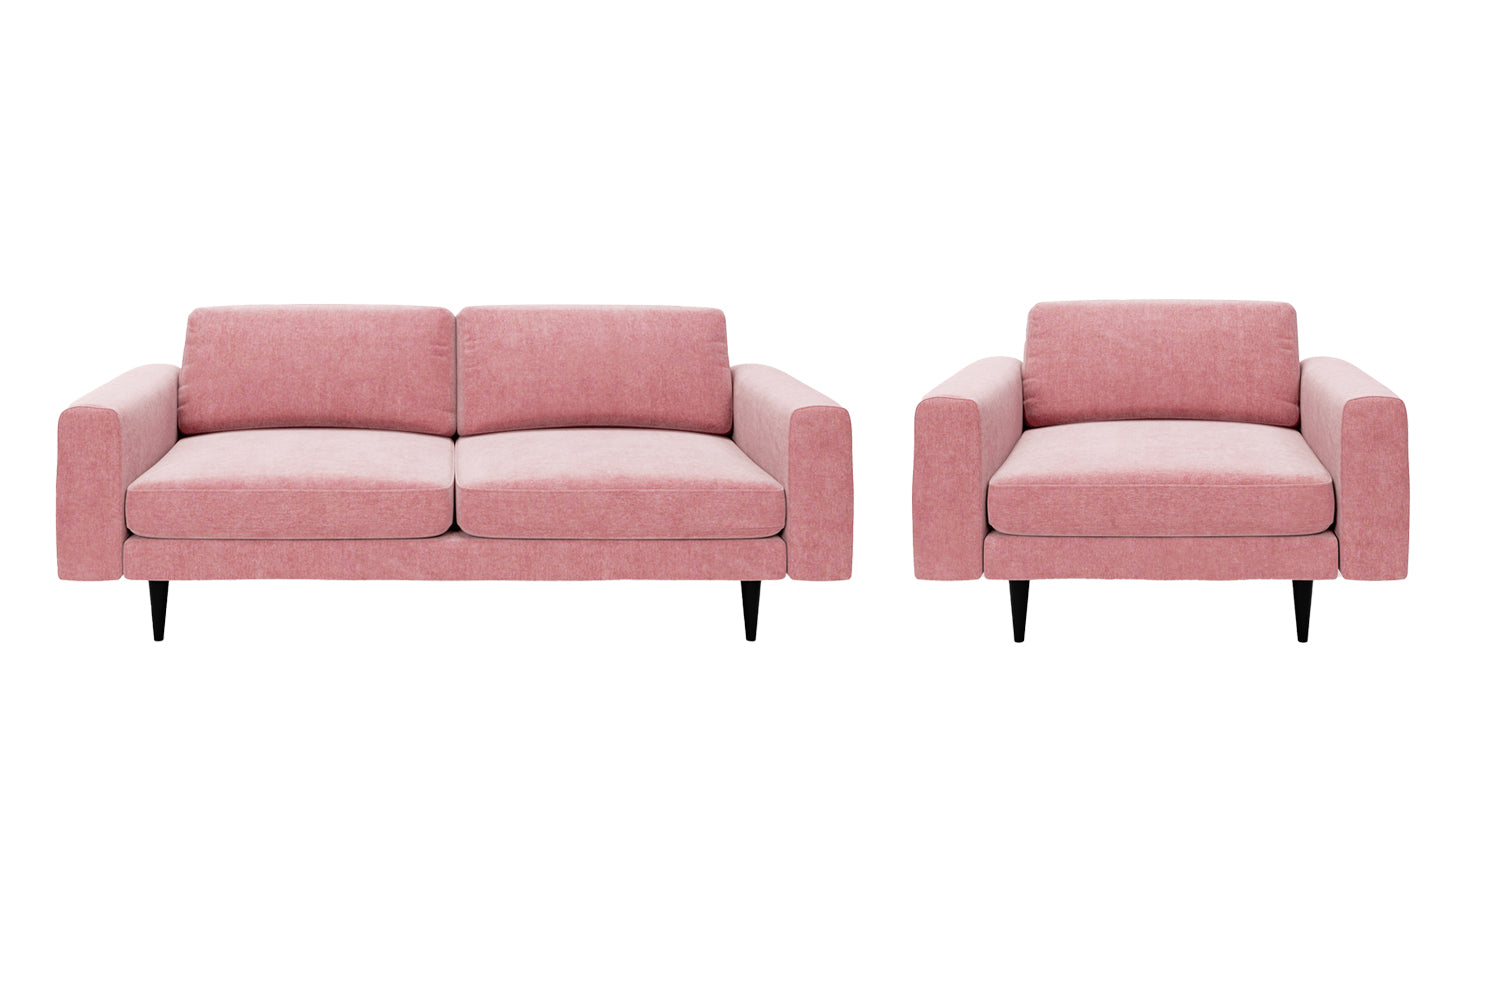 The Big Chill - 3 Seater Sofa and 1.5 Seater Snuggler Set - Blush Coral